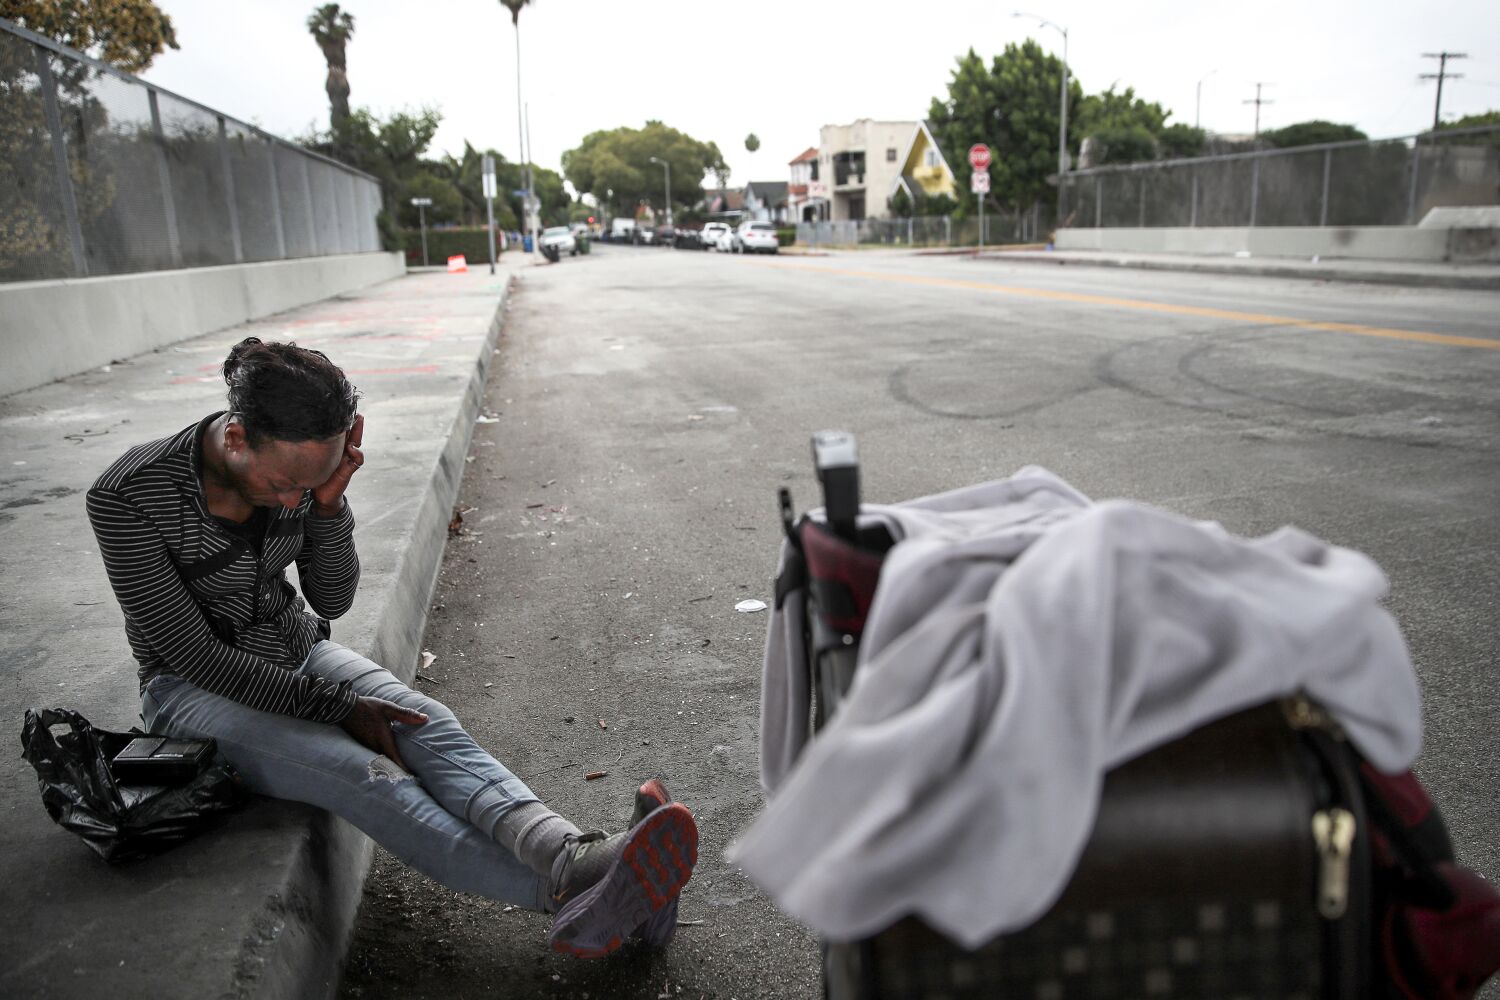 L.A. asked Congress for millions to address homelessness. But getting the cash isn't certain